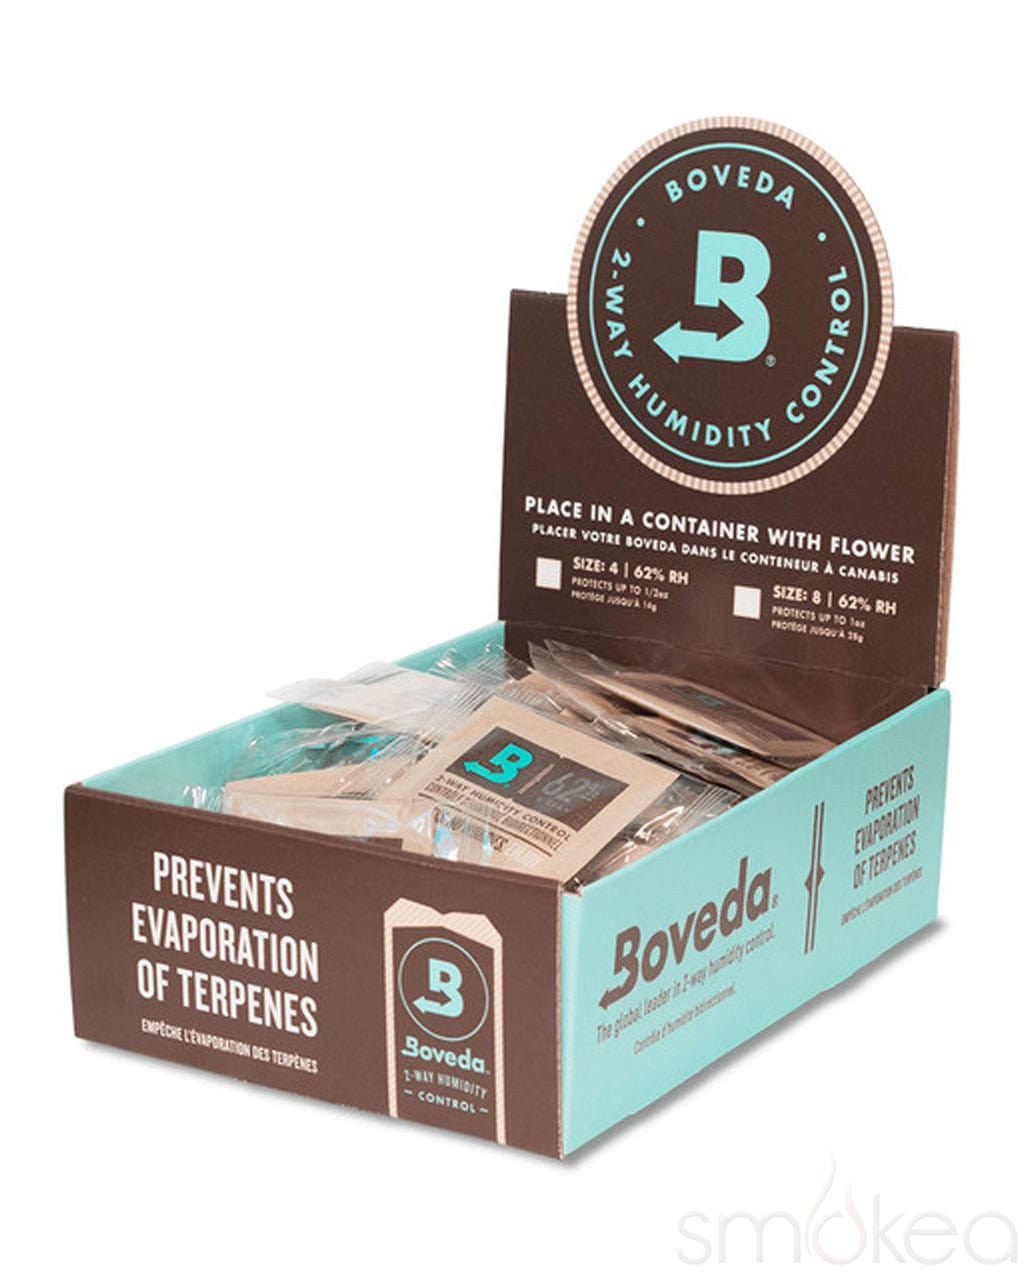 Boveda Humidity Control Pack (size 8, 62%) – Mason-re